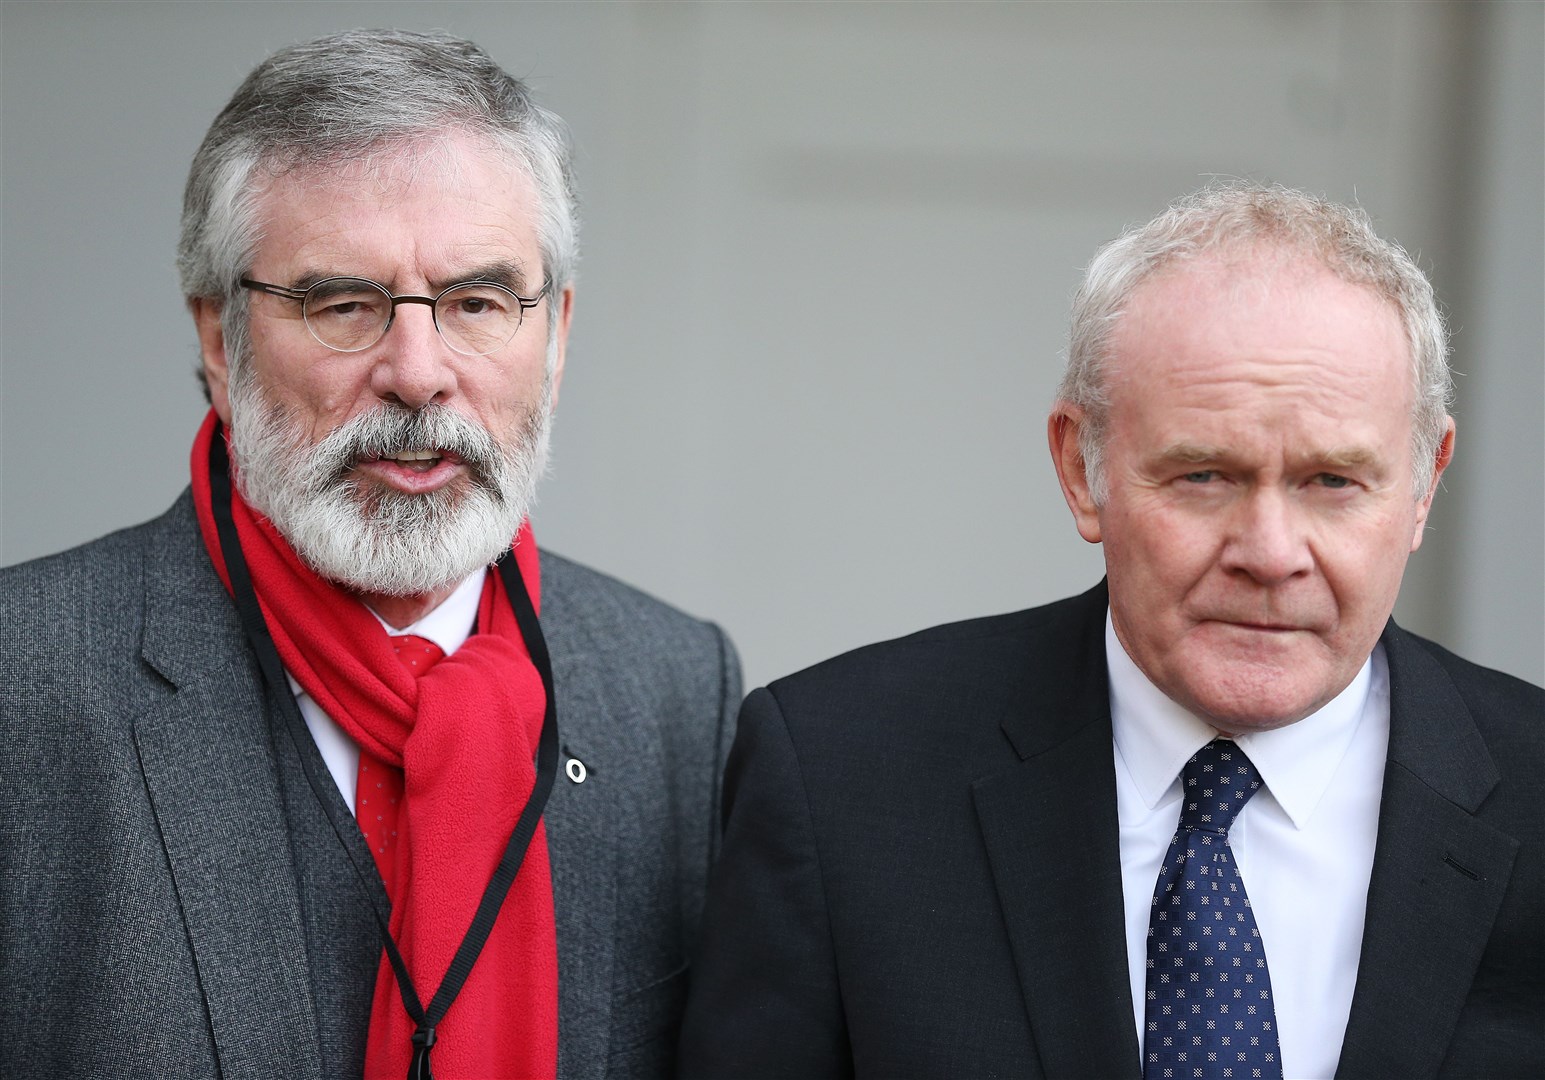 Gerry Adams (left) and Martin McGuinness. Records show the Sinn Fein leadership opposed the use of Parliament Buildings for the new Assembly (Brian Lawless/PA)